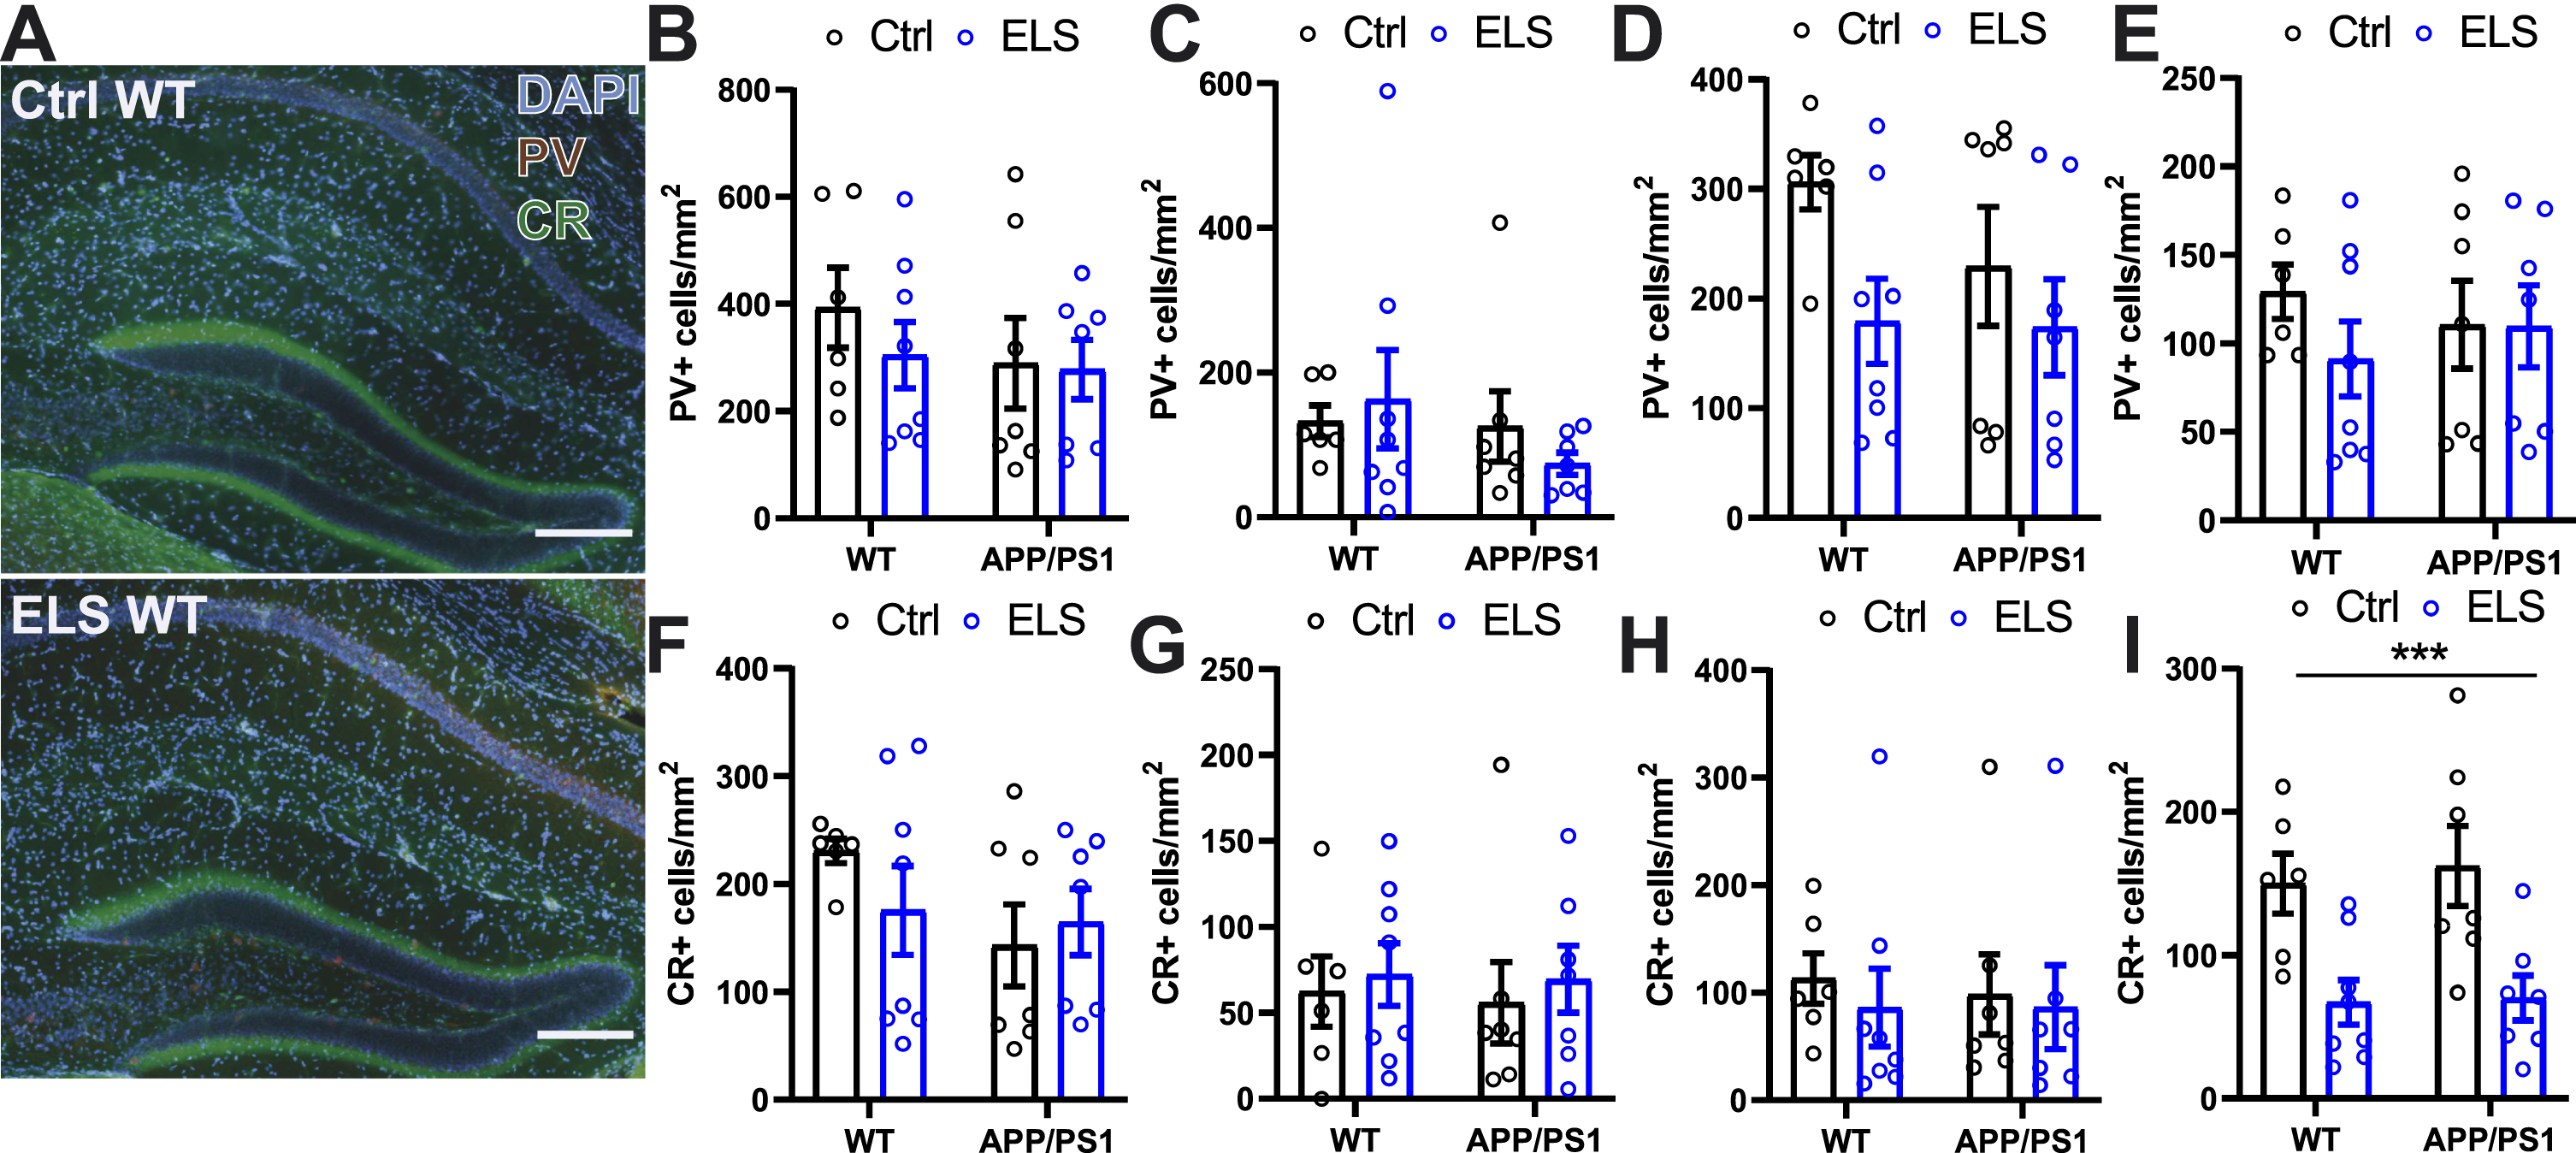 Early life stress decreases the CR+ interneuron population in the dentate gyrus of 3-month-old mice regardless of genotype. A) Representative images of hippocampal immunofluorescent parvalbumin and calretinin labelling. No differences were observed in the number of parvalbumin+ cells in the CA1 (B), CA2 (C), CA3 (D), and DG (E) between WT and APP/PS1 animals that were subjected to the ELS or Ctrl condition. No differences were observed in the number of calretinin+ cells in the CA1 (F), CA2 (G), CA3 (H) between WT and APP/PS1 animals that were subjected to the ELS or Ctrl condition. I) A significantly lower number of calretinin+ cells were observed in the DG as a result of ELS regardless of genotype (Fcondition(1,24) = 18.37, p = 0.0003). Data is presented as mean±SEM. Scale bar = 200μm. Ctrl WT n = 6, ELS WT n = 8, Ctrl APP/PS1 n = 7, ELS APP PS1 n = 7. ***two-way ANOVA main effect of condition p < 0.001.